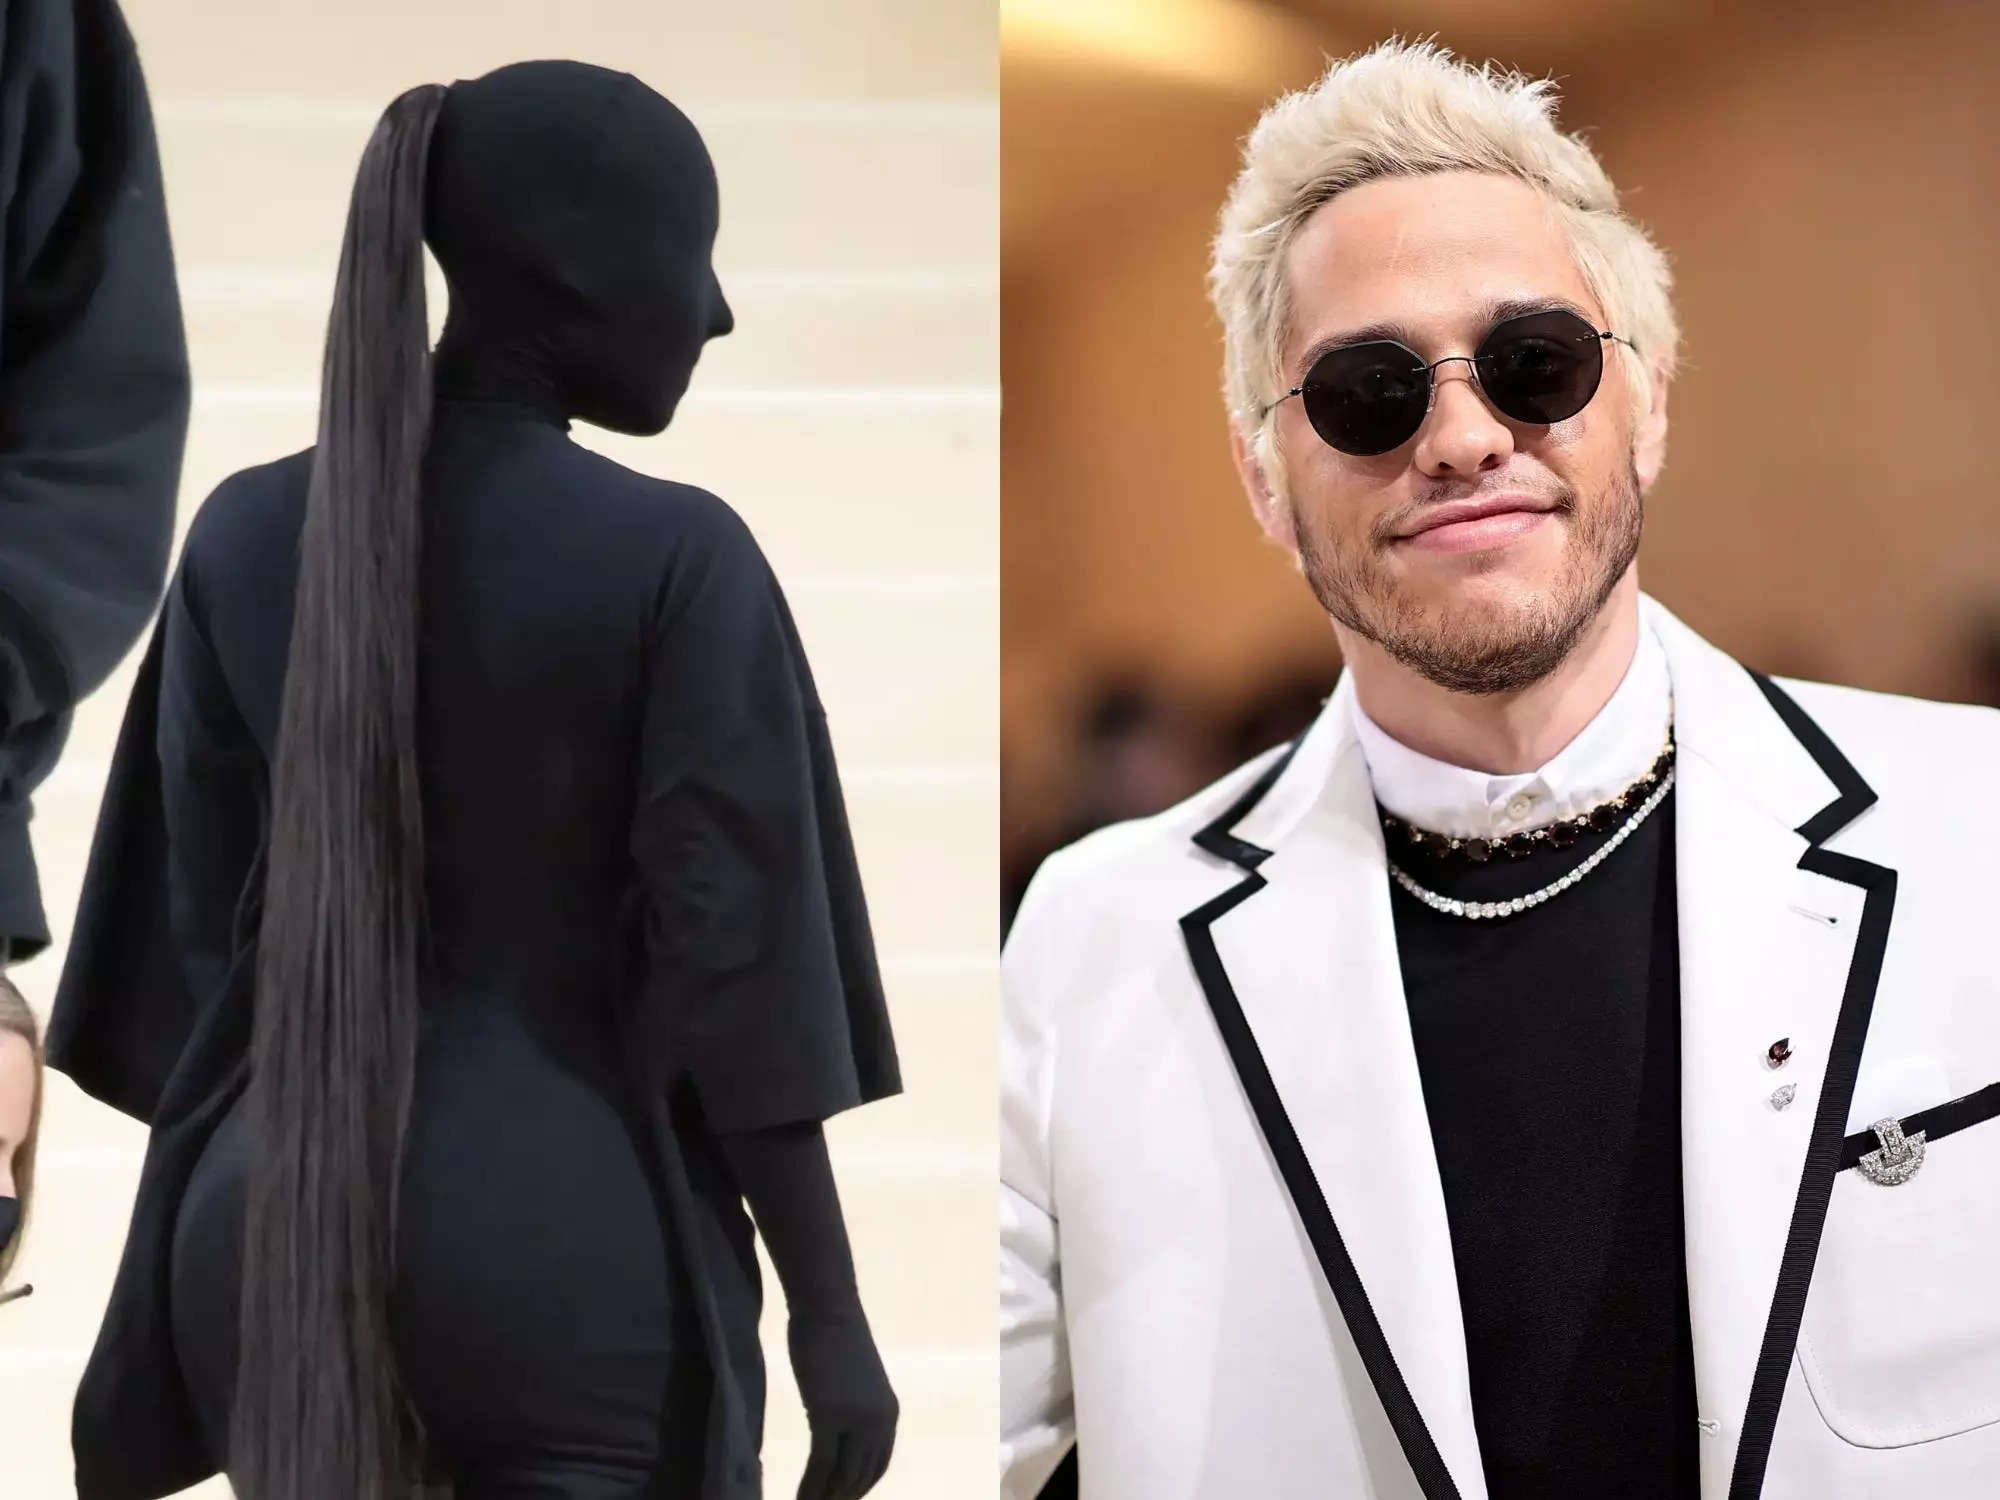 
Kim Kardashian says Pete Davidson tried to give her his number when they first connected at the Met Gala, but she couldn't use her phone because of her outfit
